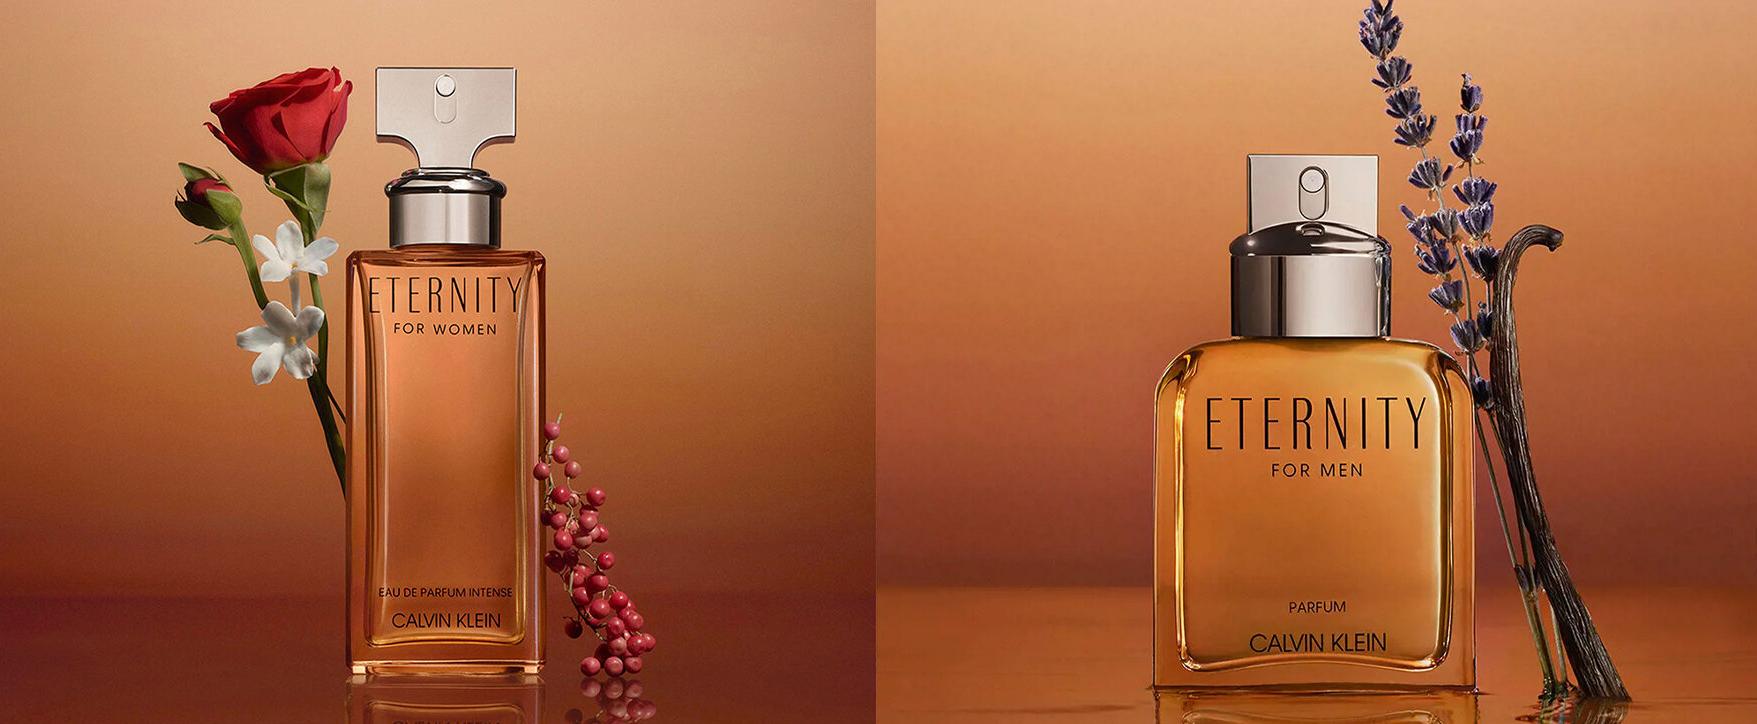 Calvin Klein Expands Popular Eternity Line With New Fragrance Duo